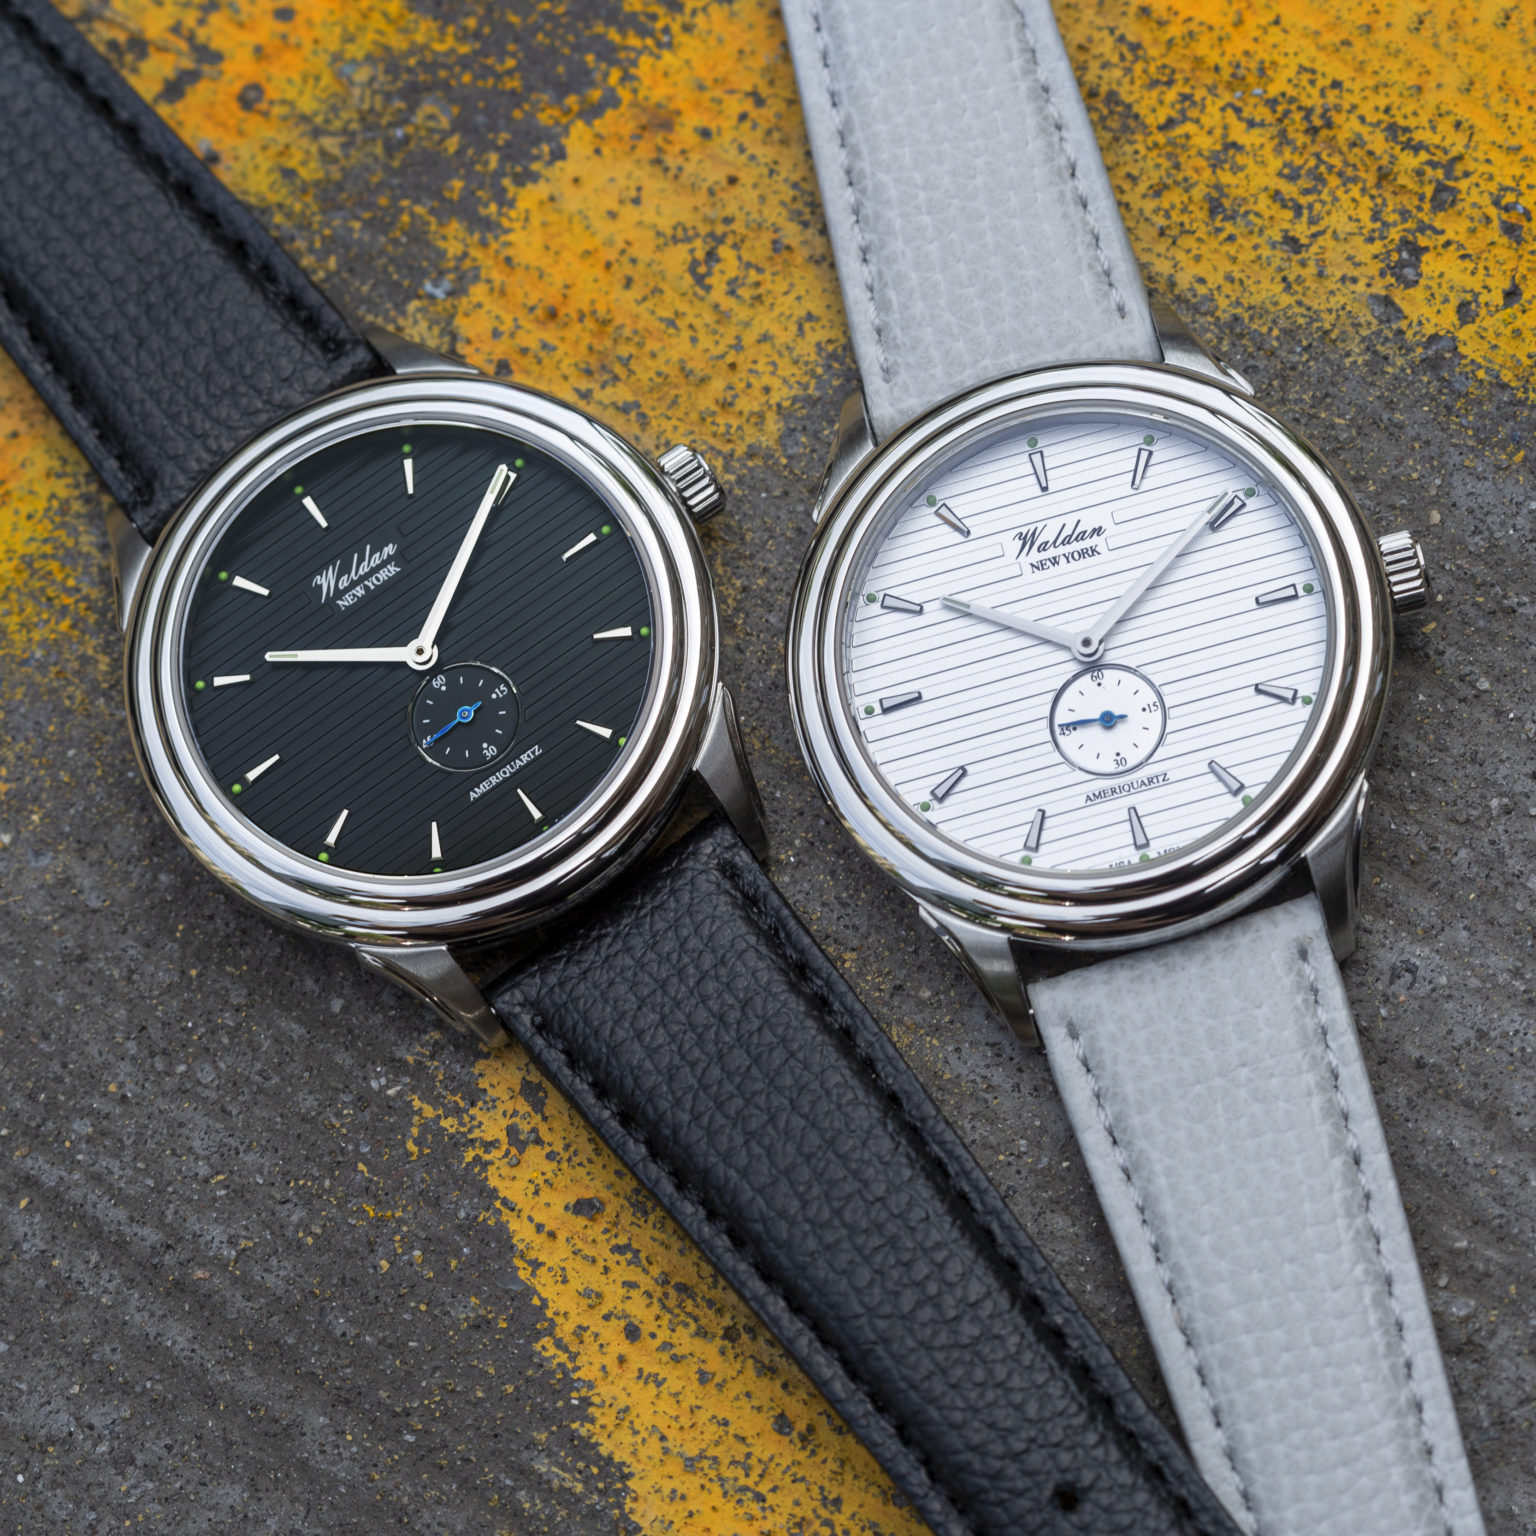 American Revival: Introducing the Waldan Watches Heritage Collection ...